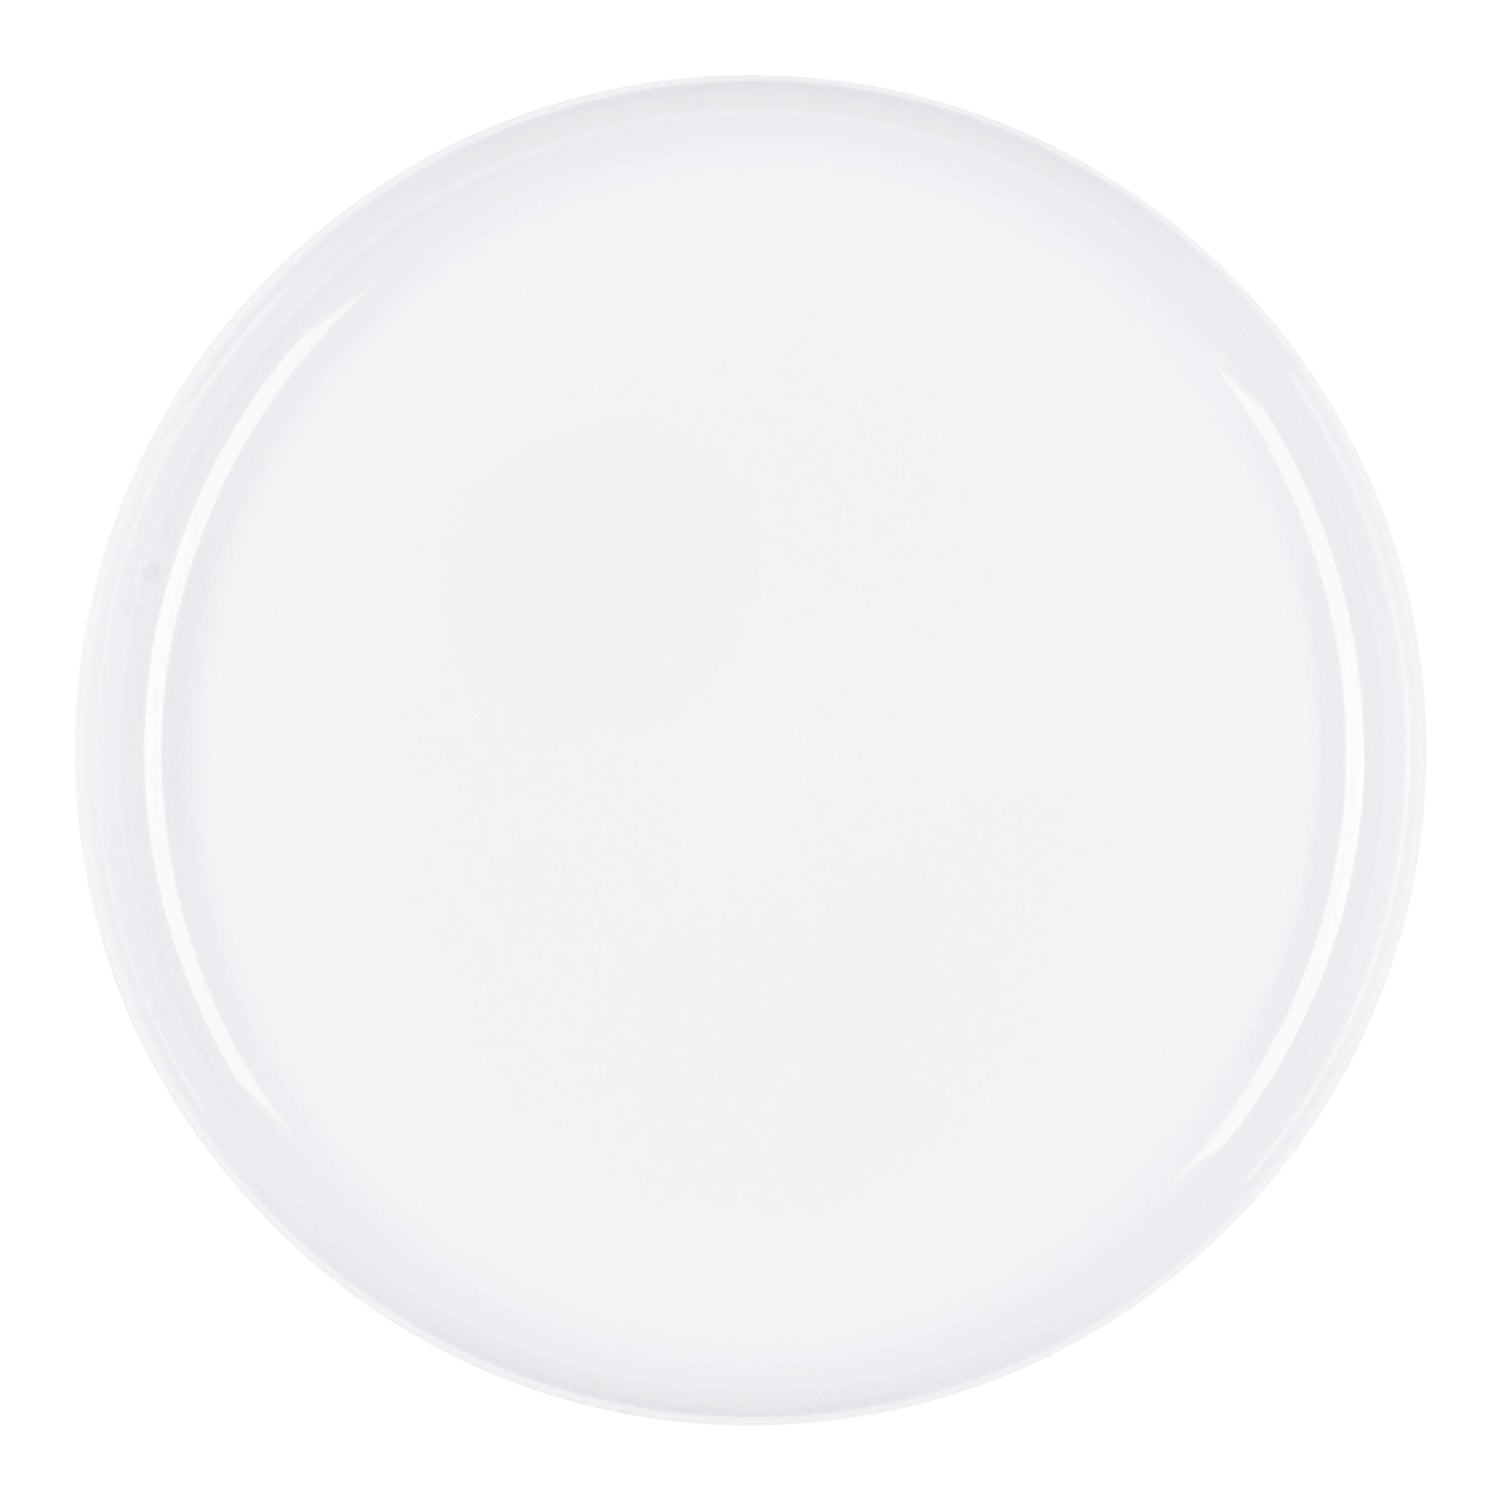 White Flat Round Disposable Plastic Appetizer/Salad Plates (8.5") | The Kaya Collection